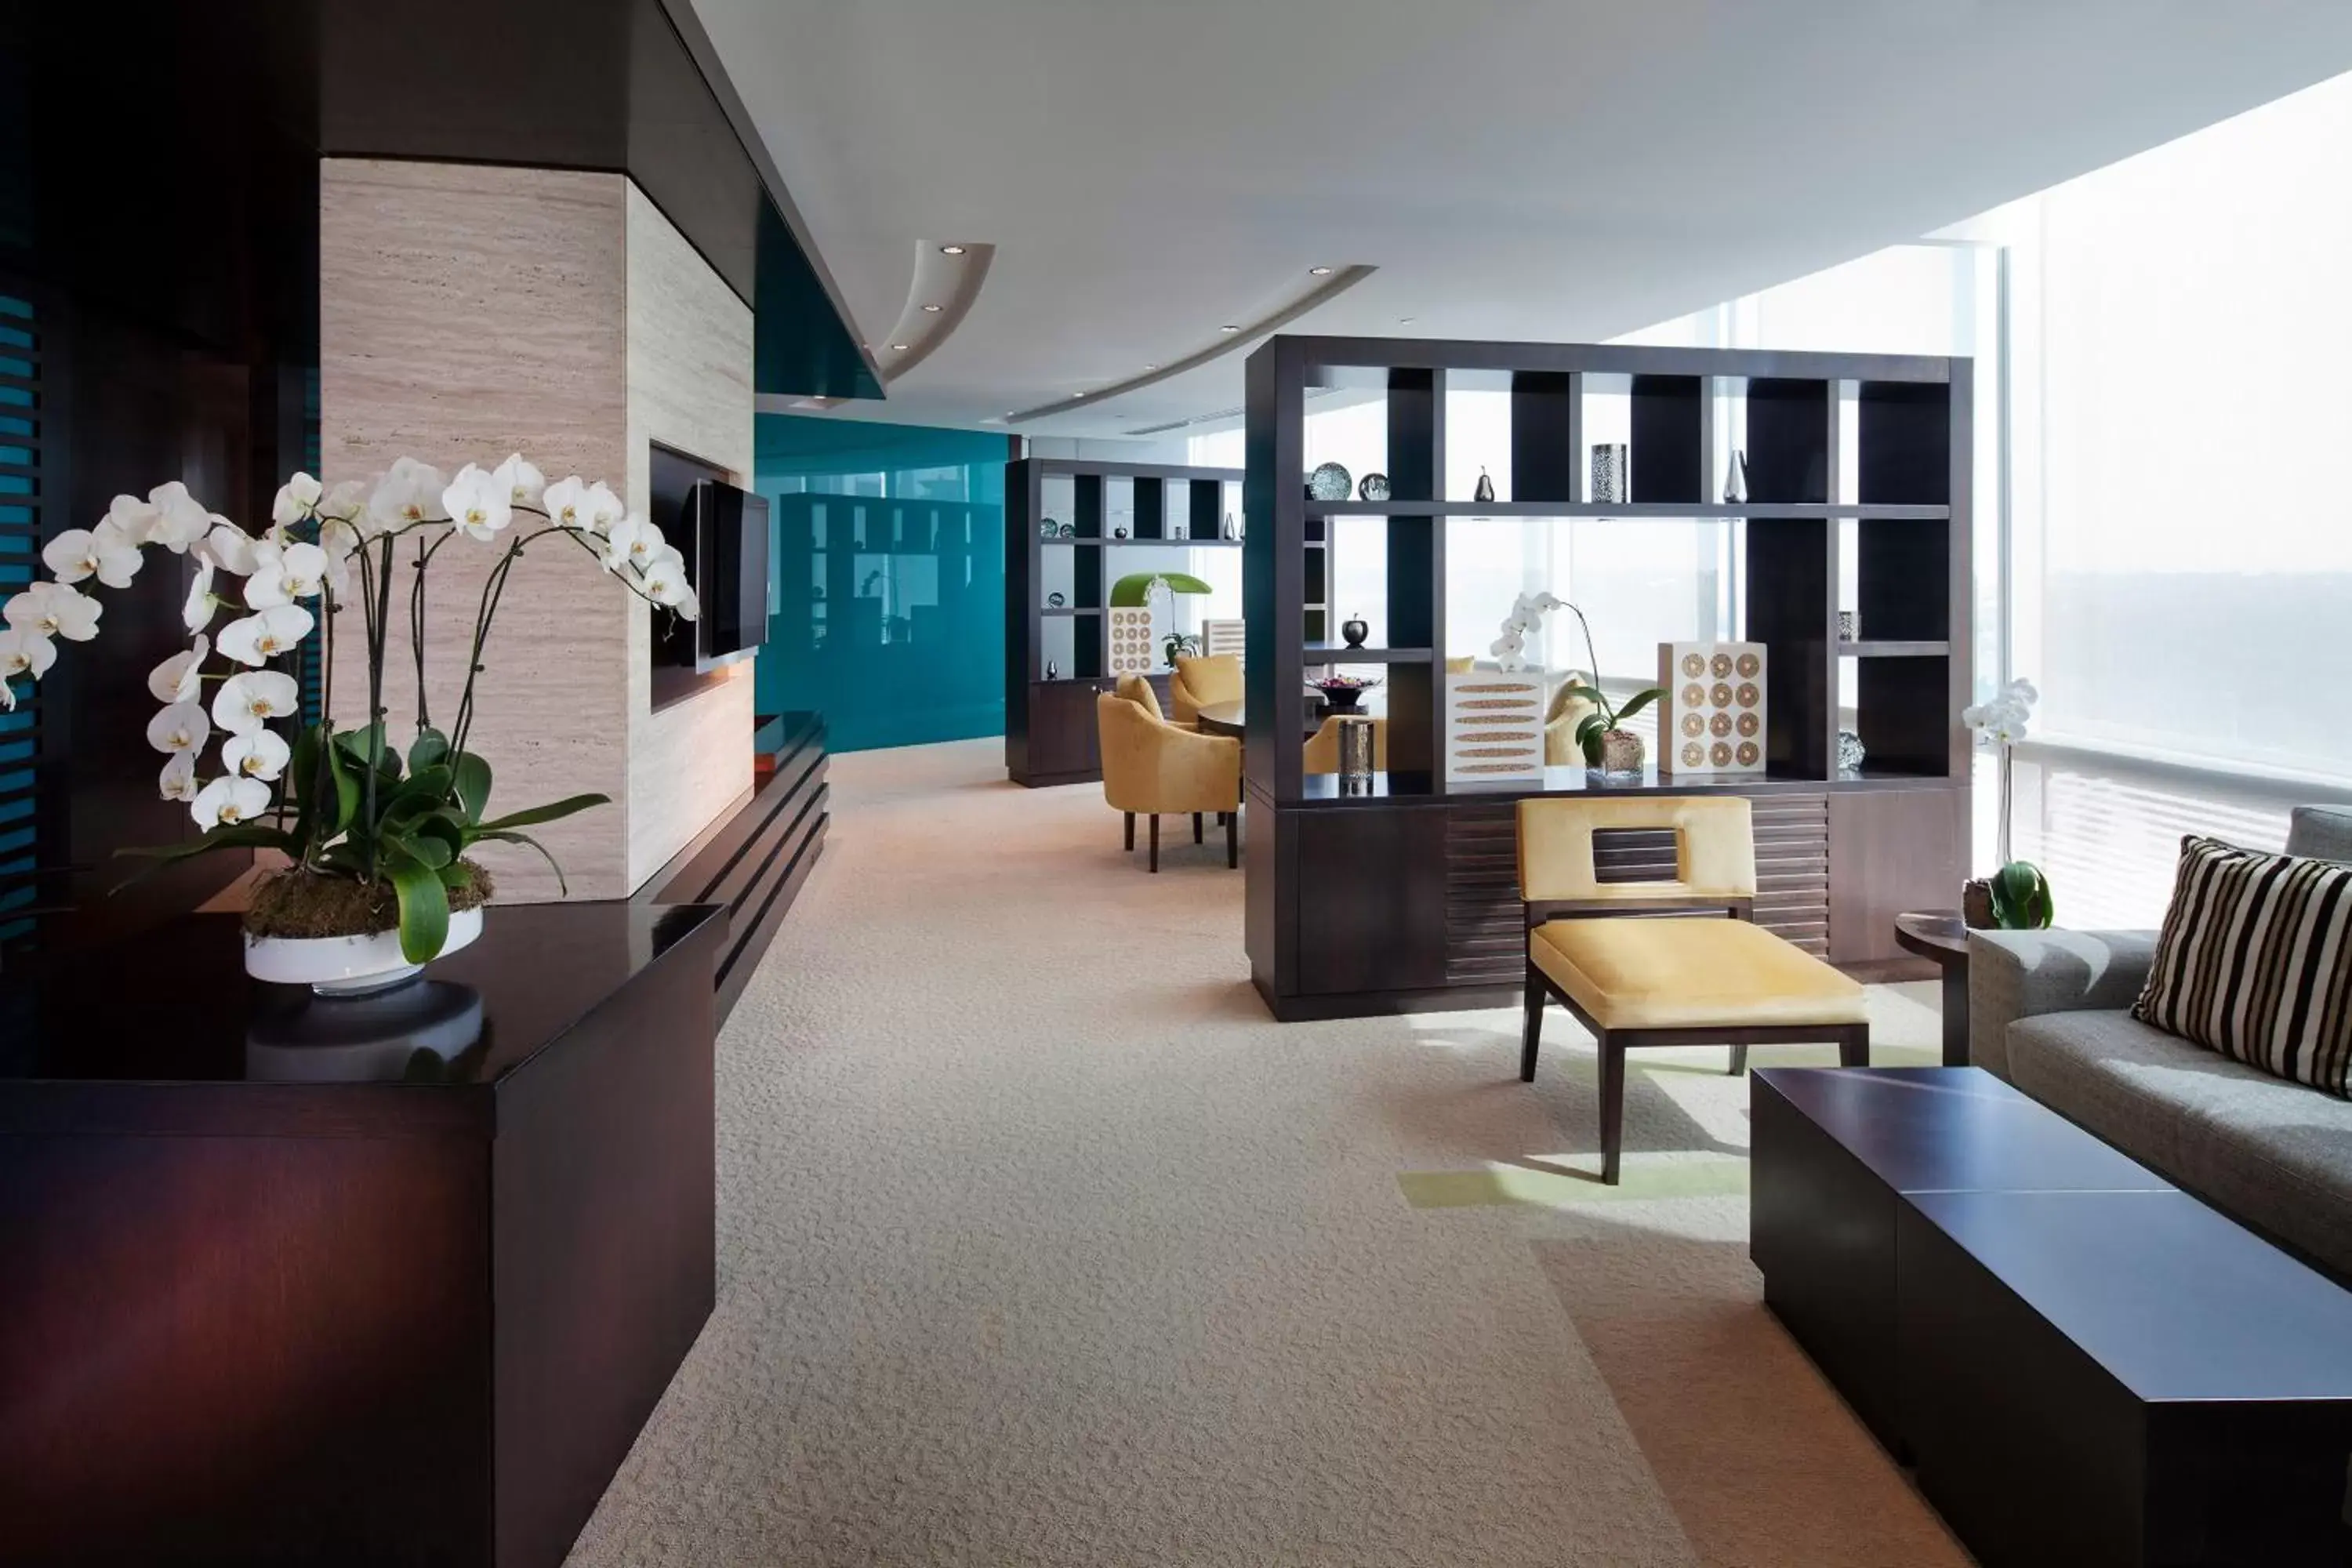 Business facilities in Jumeirah Emirates Towers